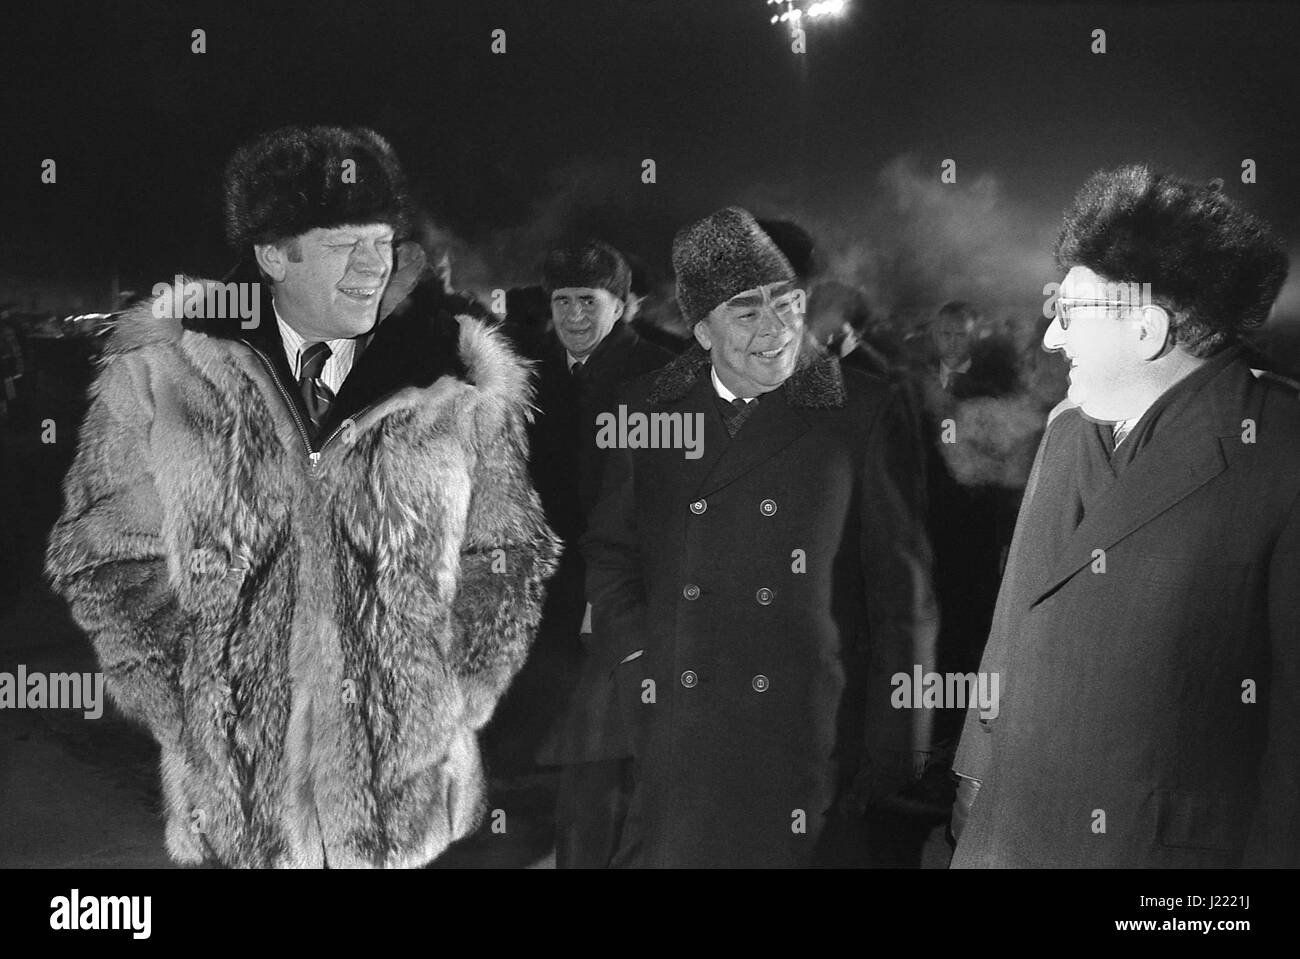 U.S President Gerald Ford wearing a Russian fur hat and wolfskin coat chats with Soviet General Secretary Leonid Brezhnev, center and Secretary of State Henry Kissinger at Vozdvizhenka Airbase before departure November 24, 1974 in Vladivostok, Russia, USSR. Ford is departing at the conclusion of a two-day summit on Arms Control. Stock Photo